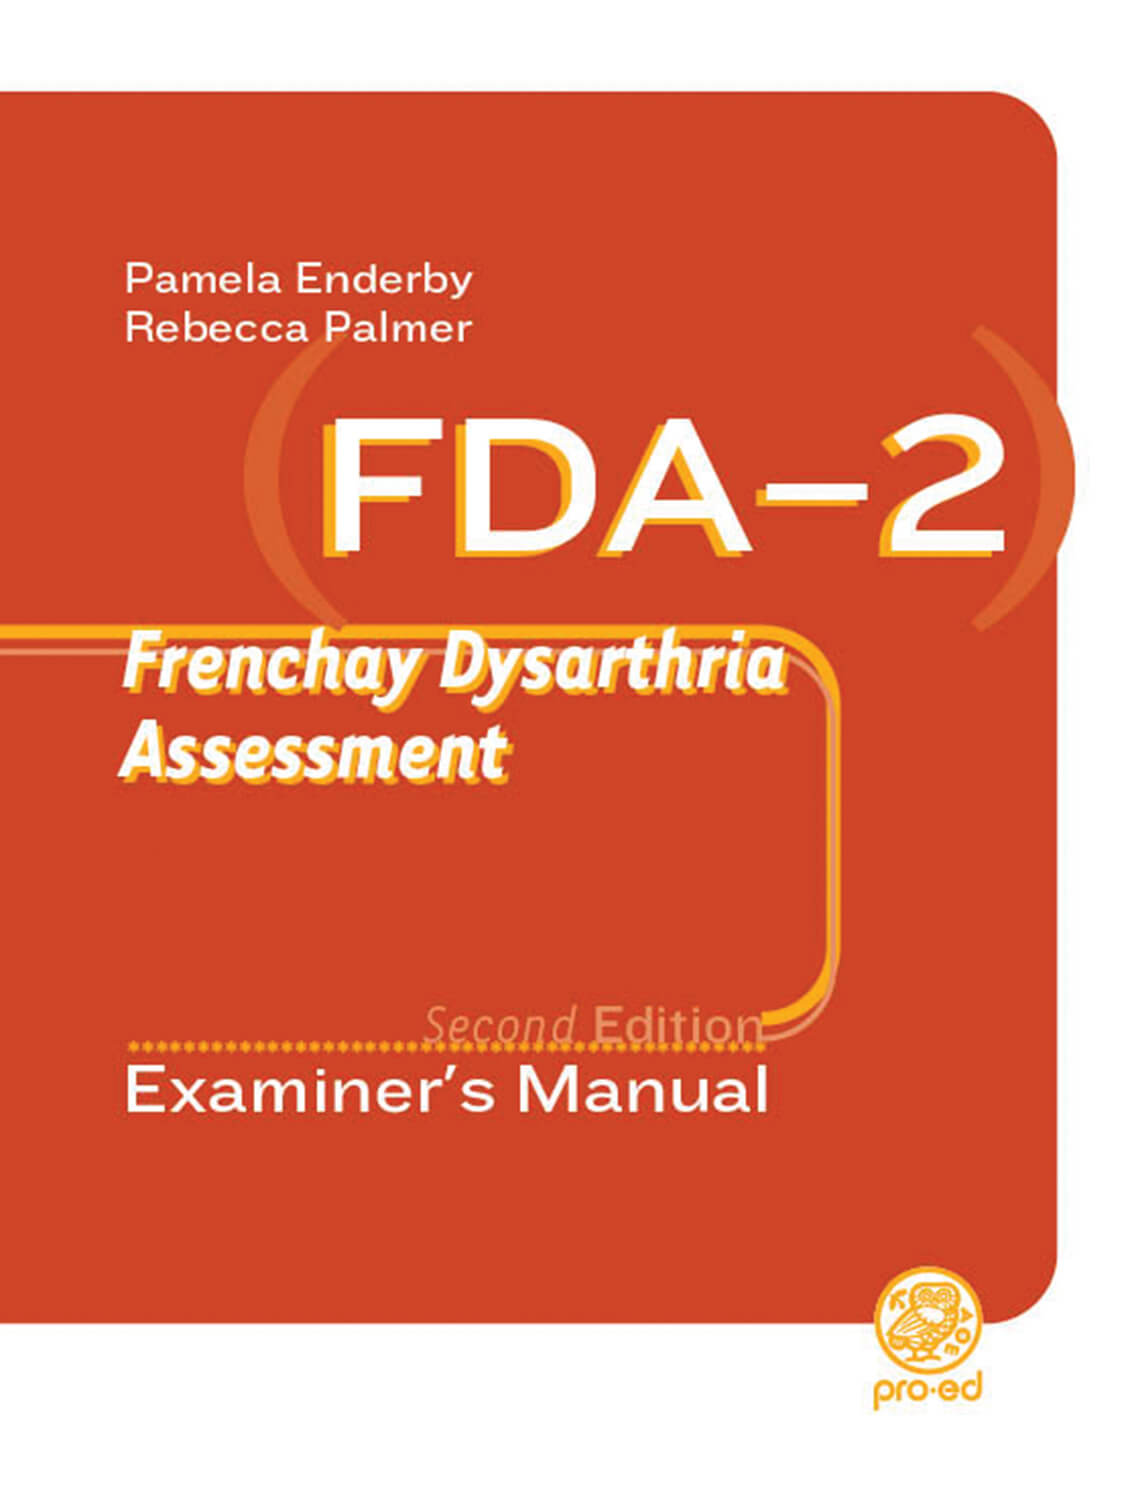 FDA-2: Frenchay Dysarthria Assessment 2nd Ed - 